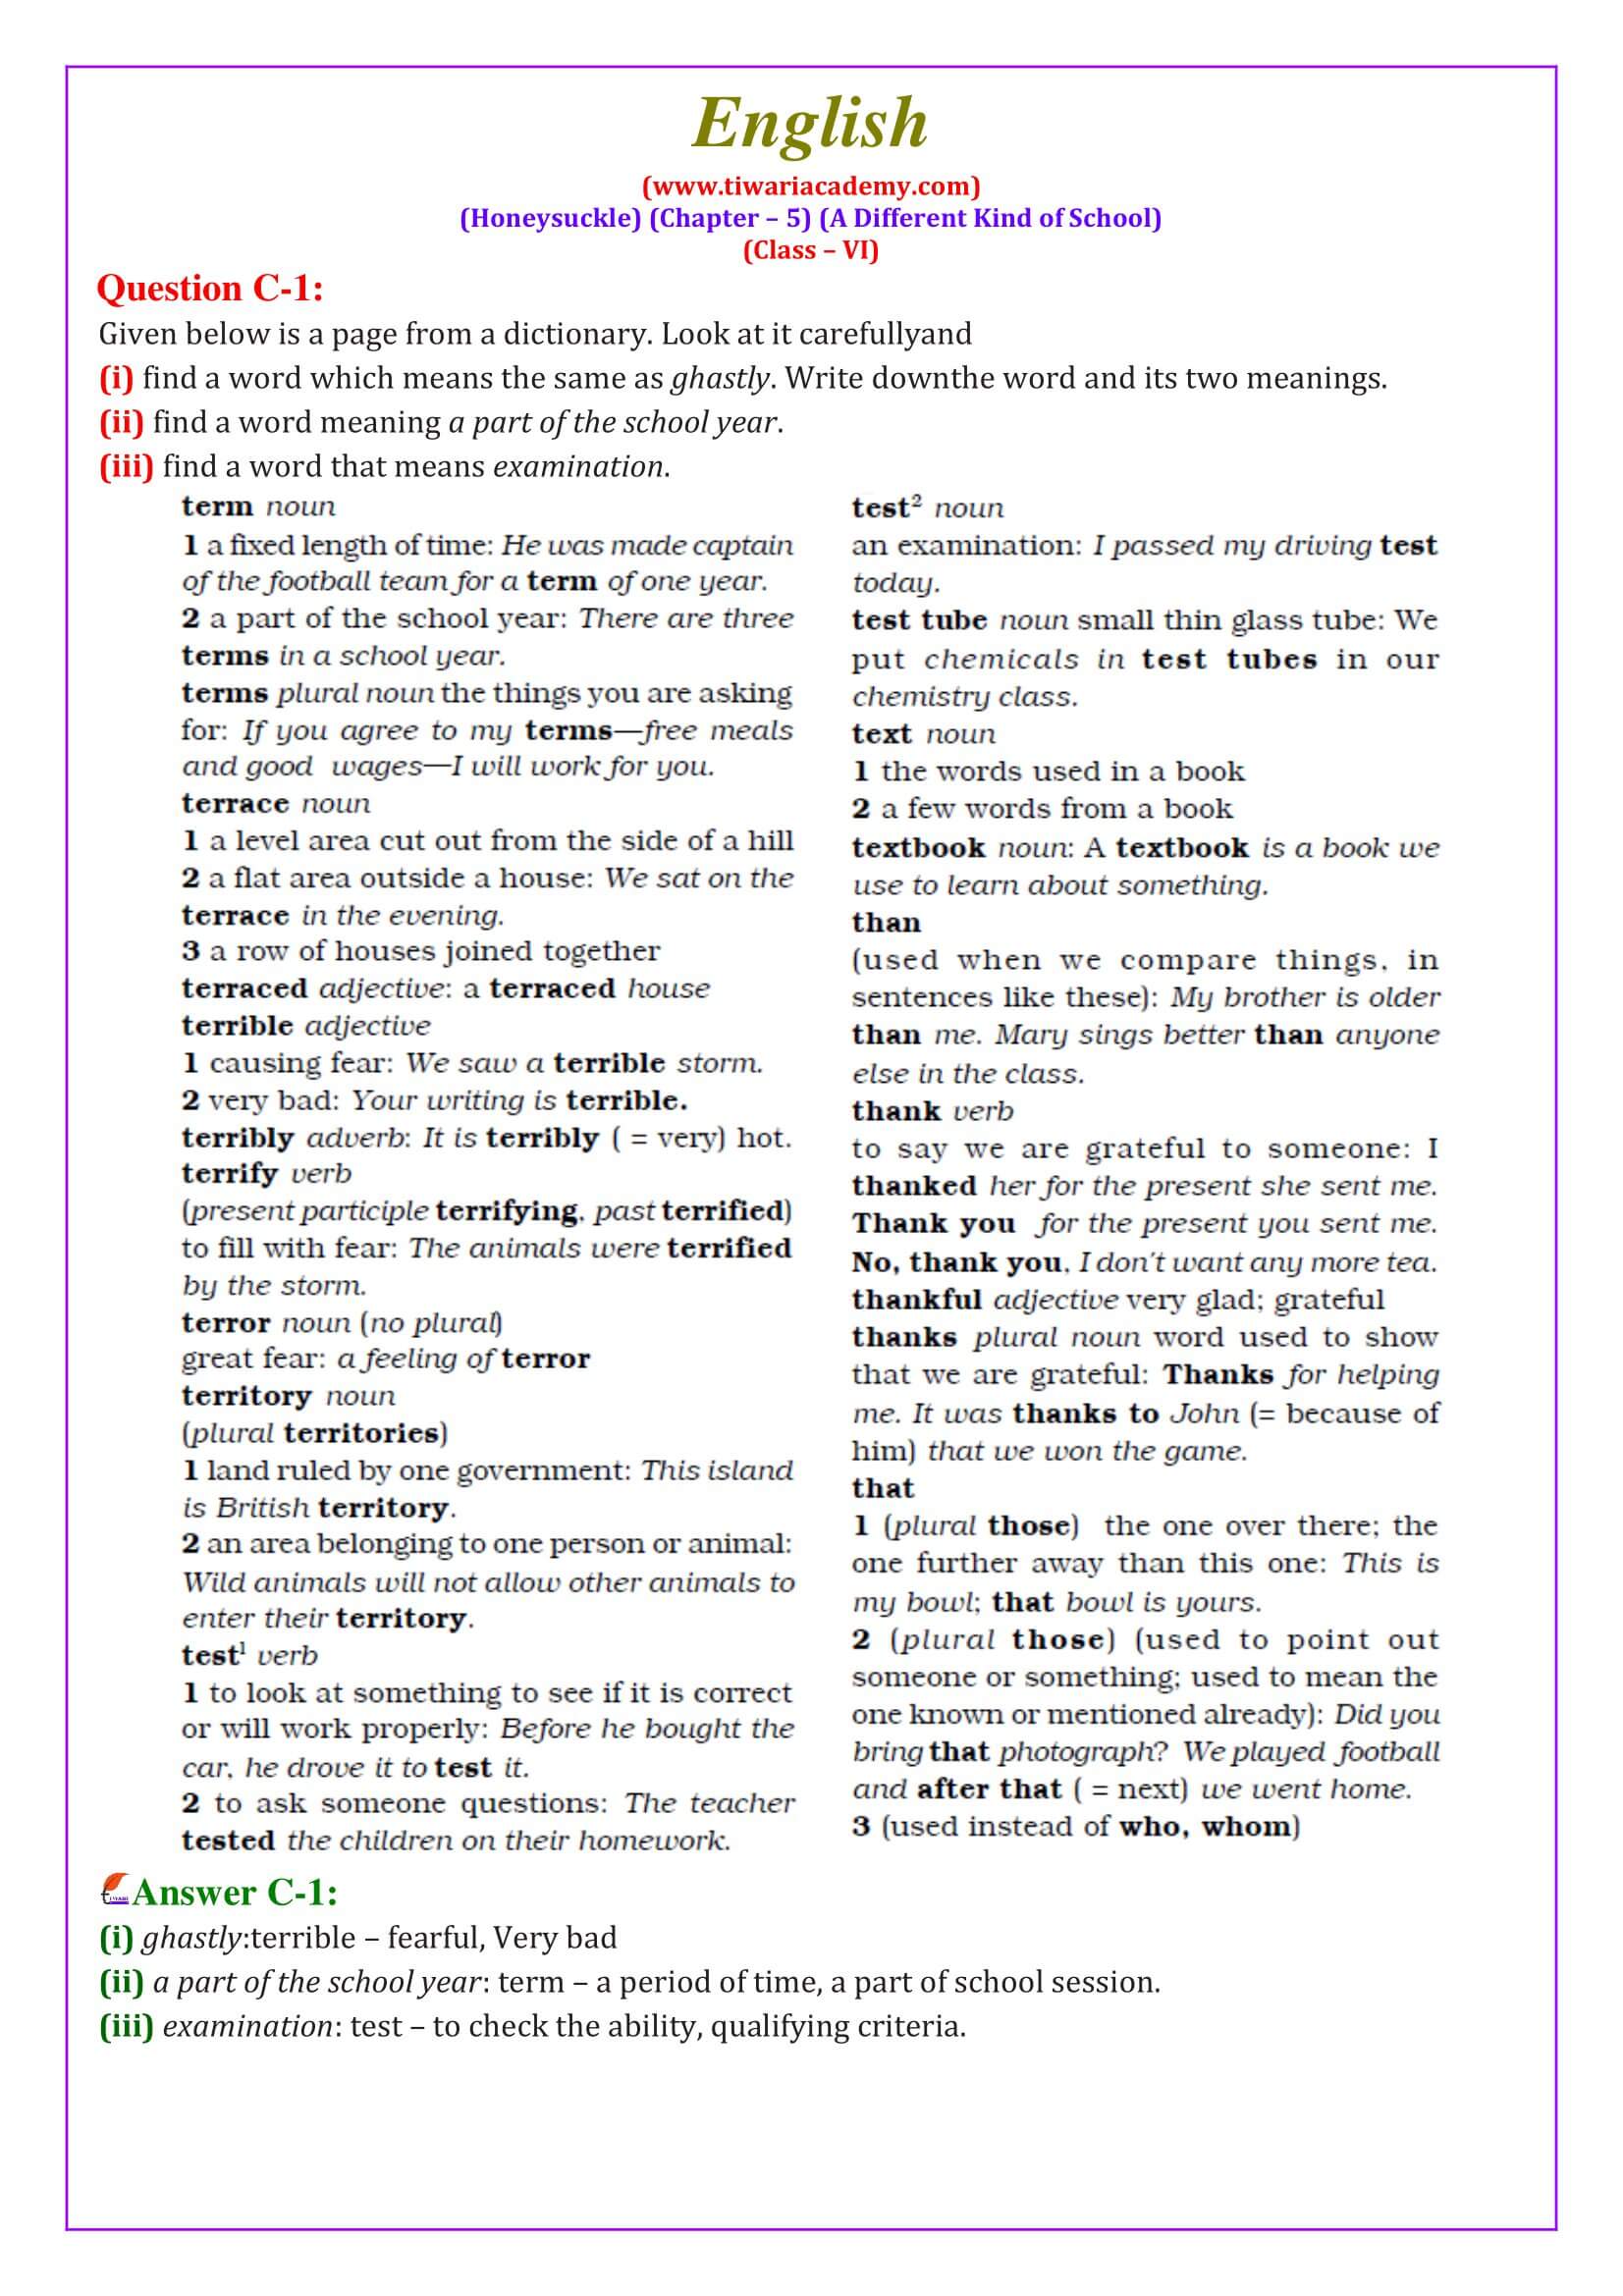 NCERT Solutions for Class 6 English Honeysuckle Chapter 5 Guide